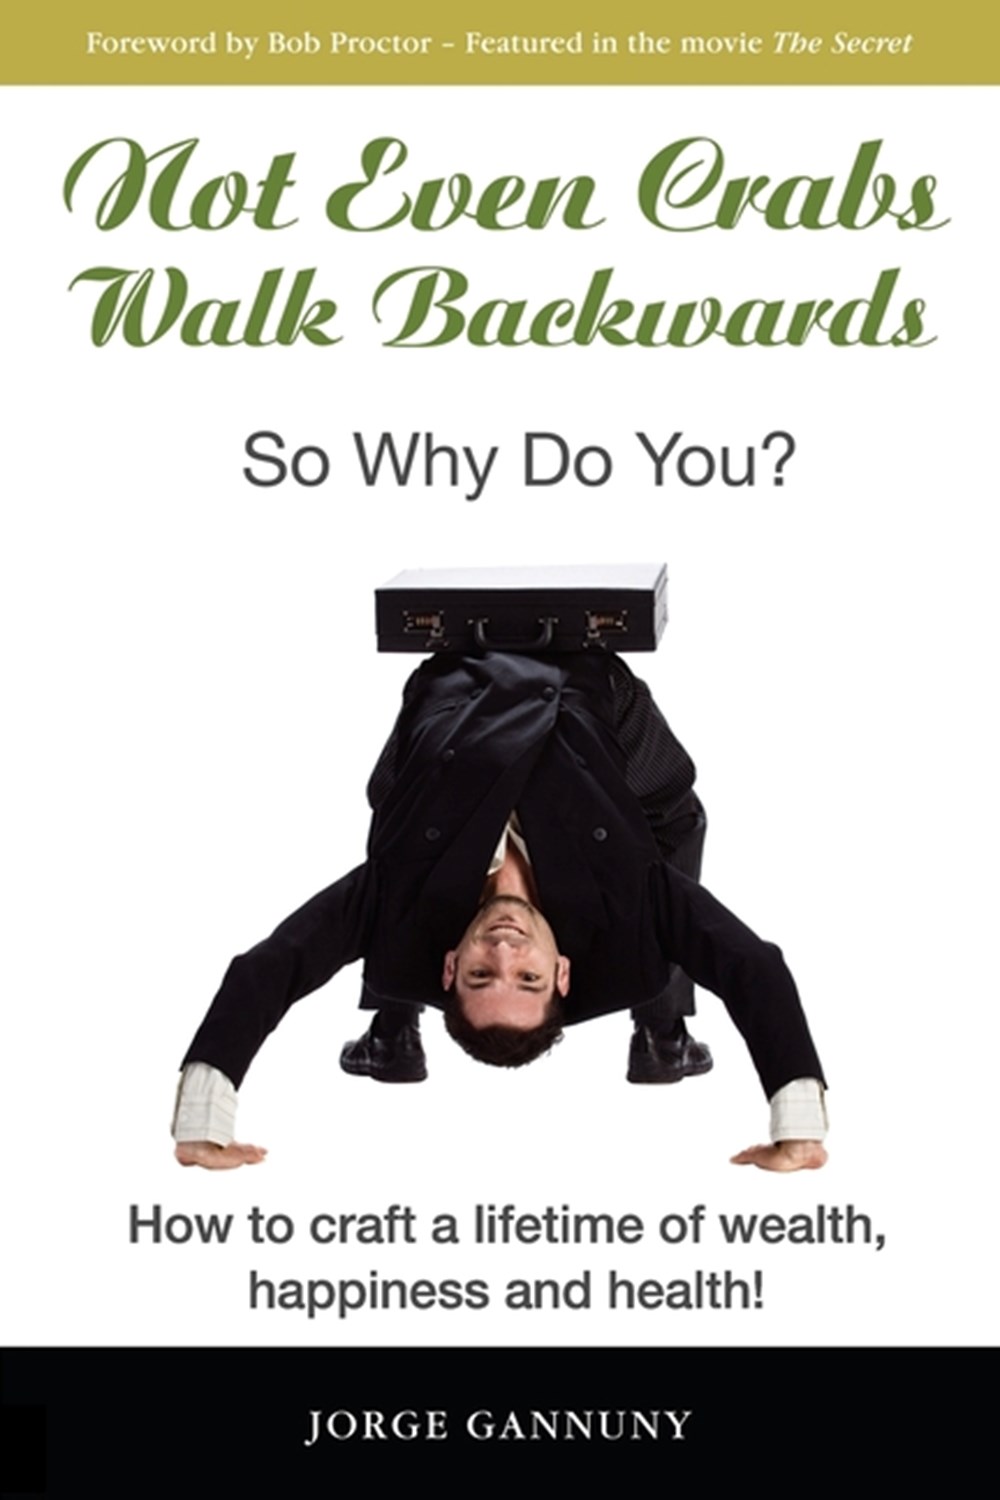 Not Even Crabs Walk Backwards: So Why Do You?: How to craft a lifetime of wealth, happiness and heal